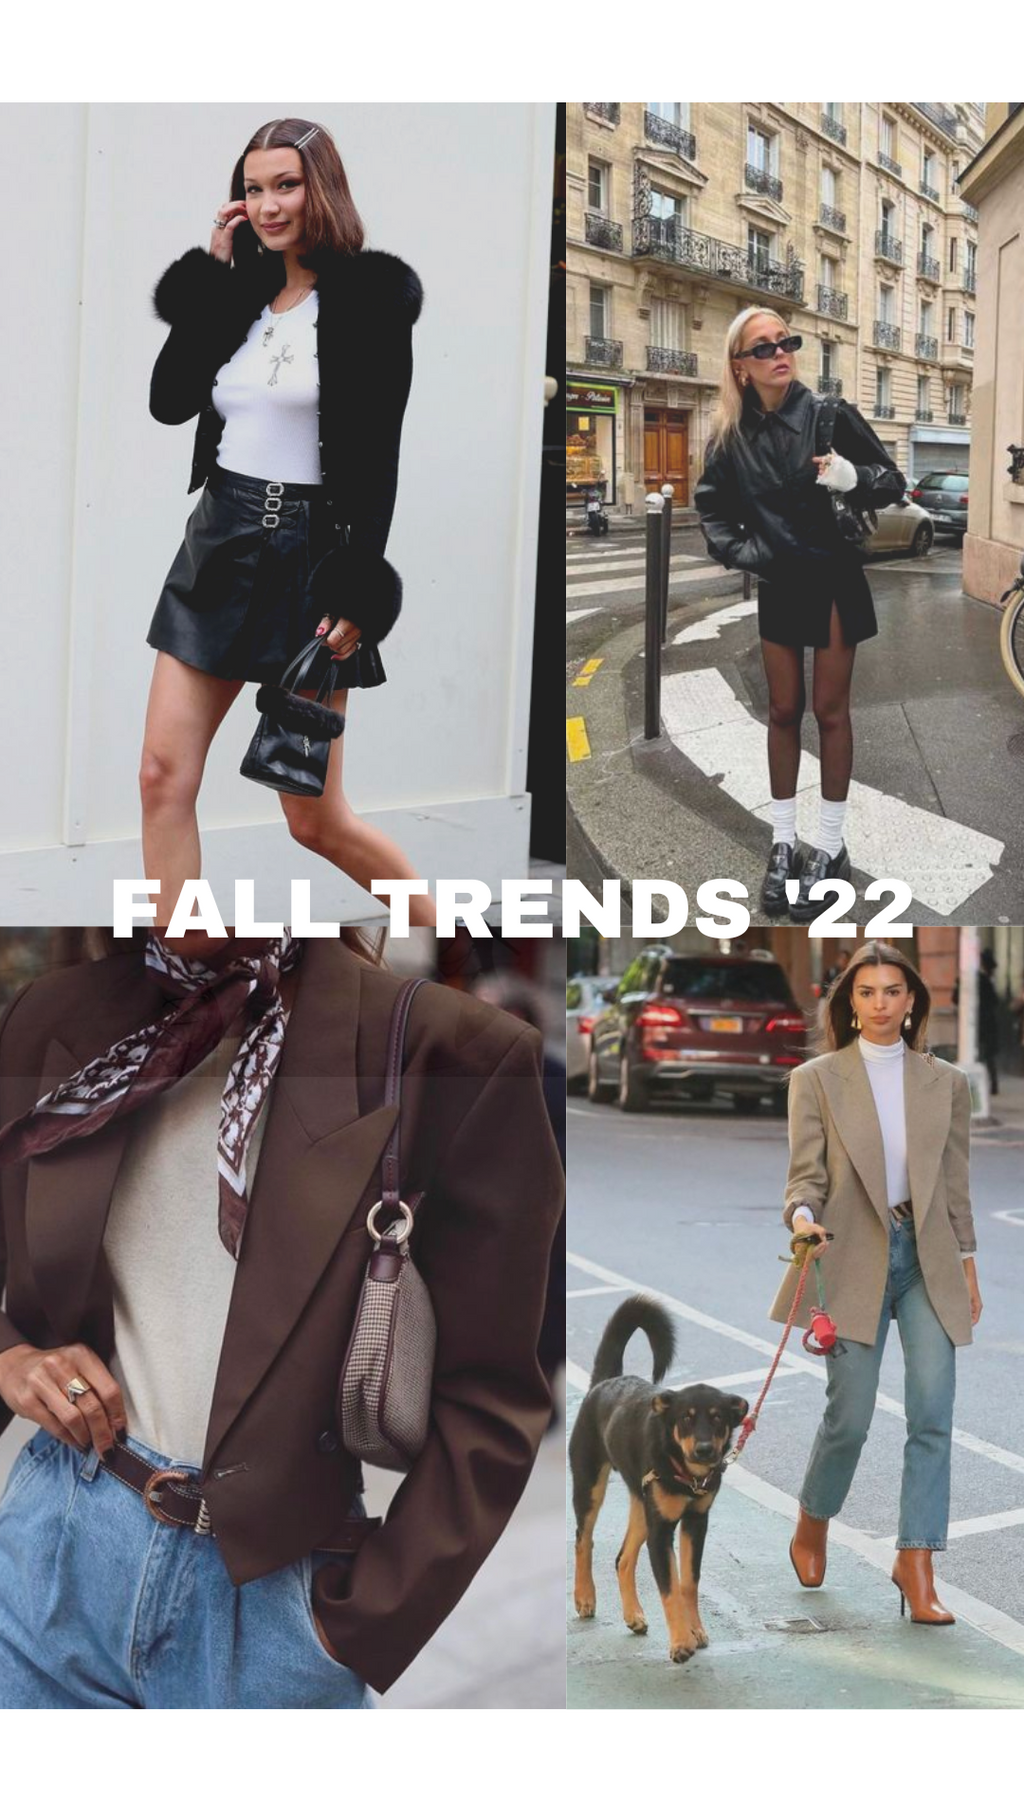 My fav trends for this Fall '22